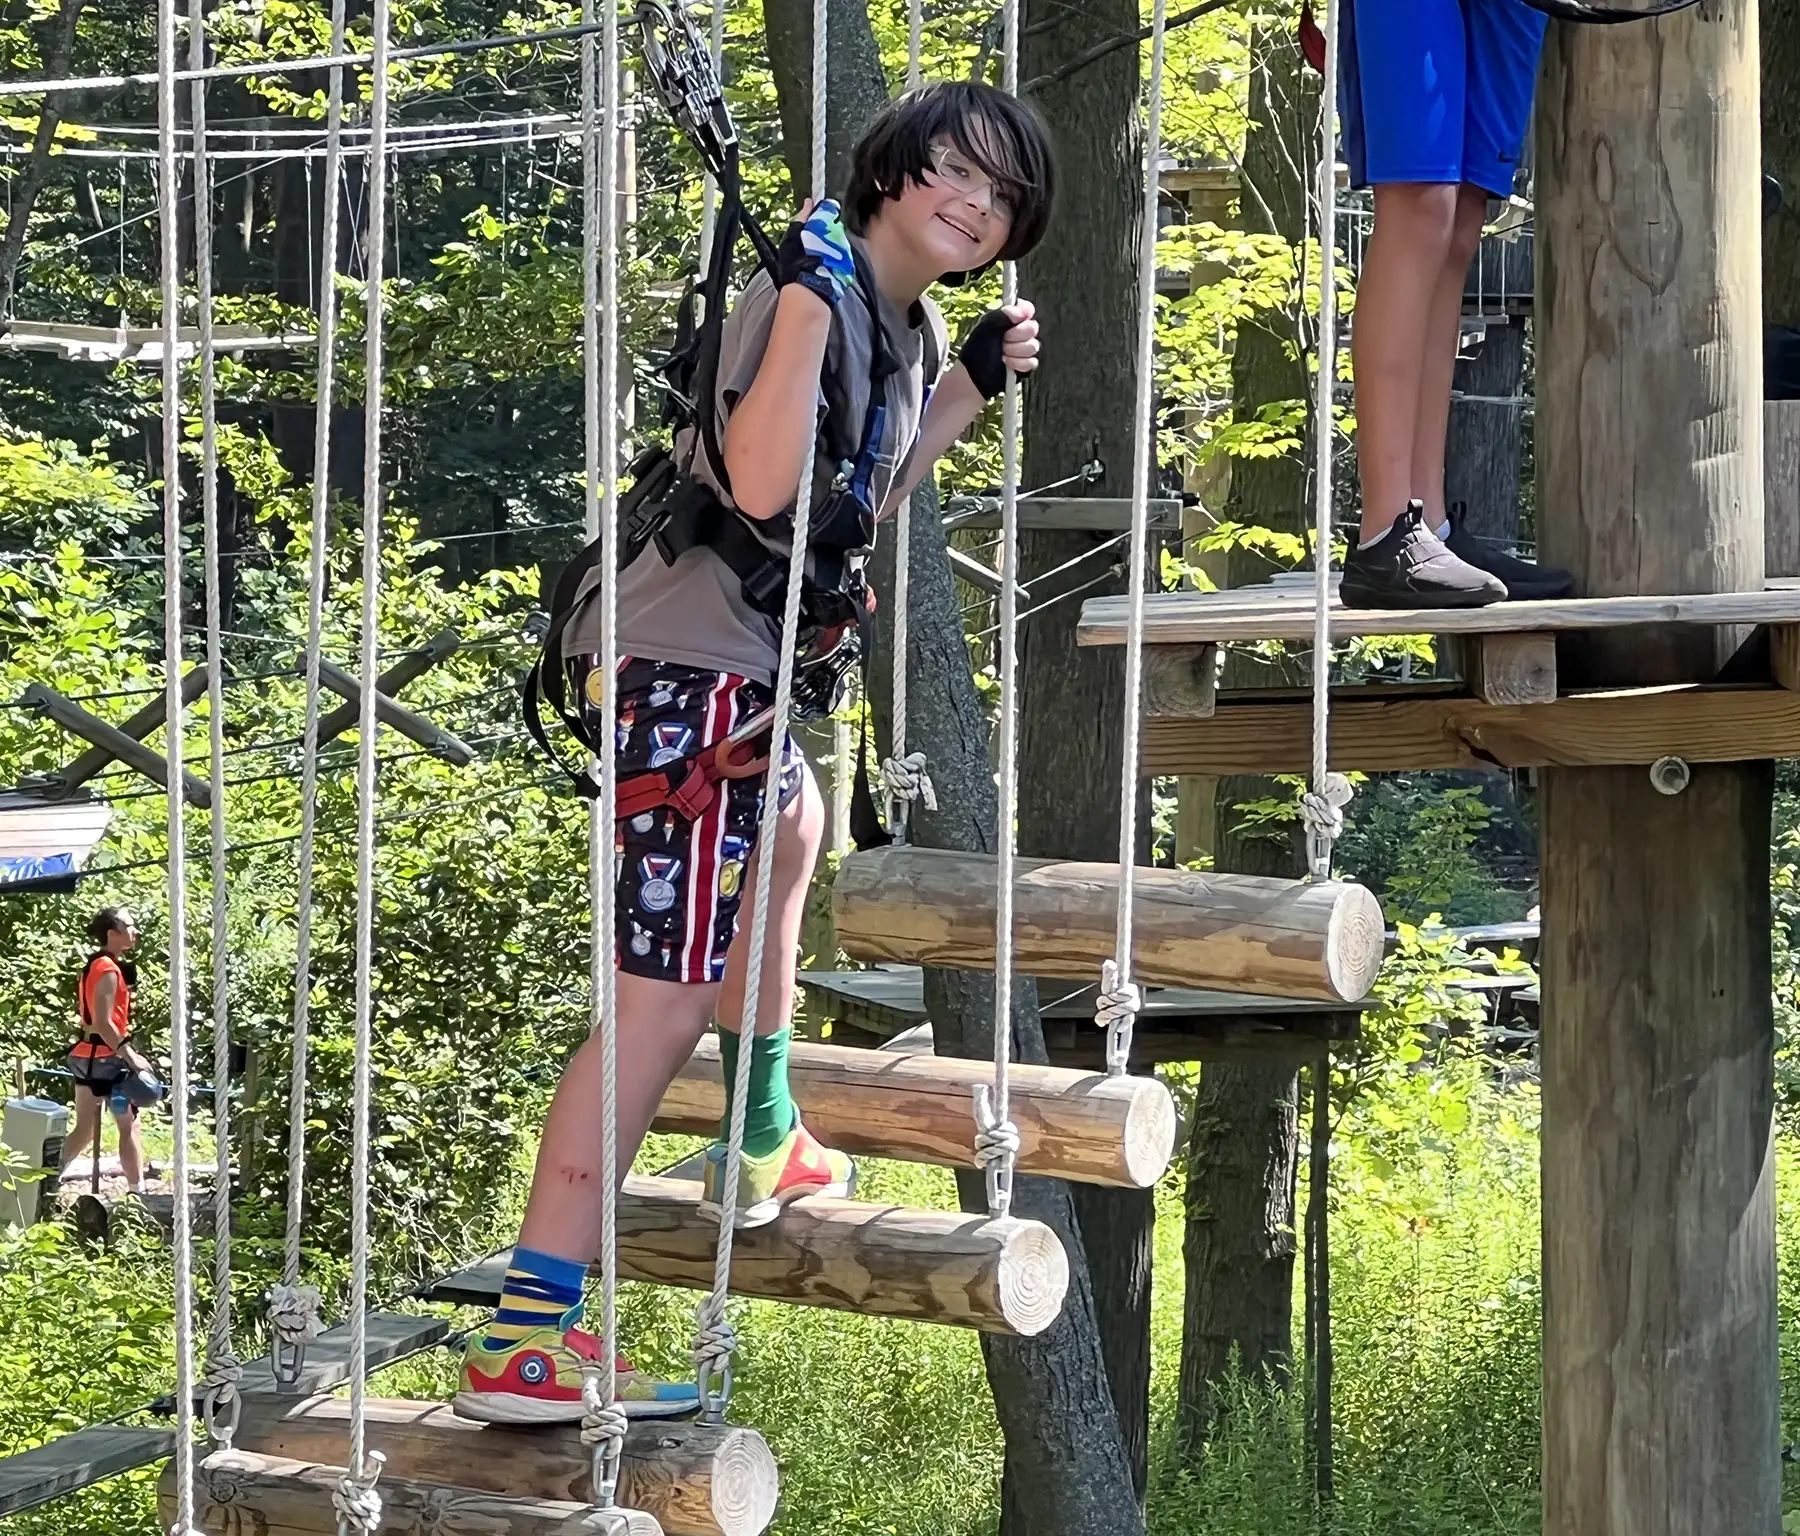 Boy on wooden obstacle course